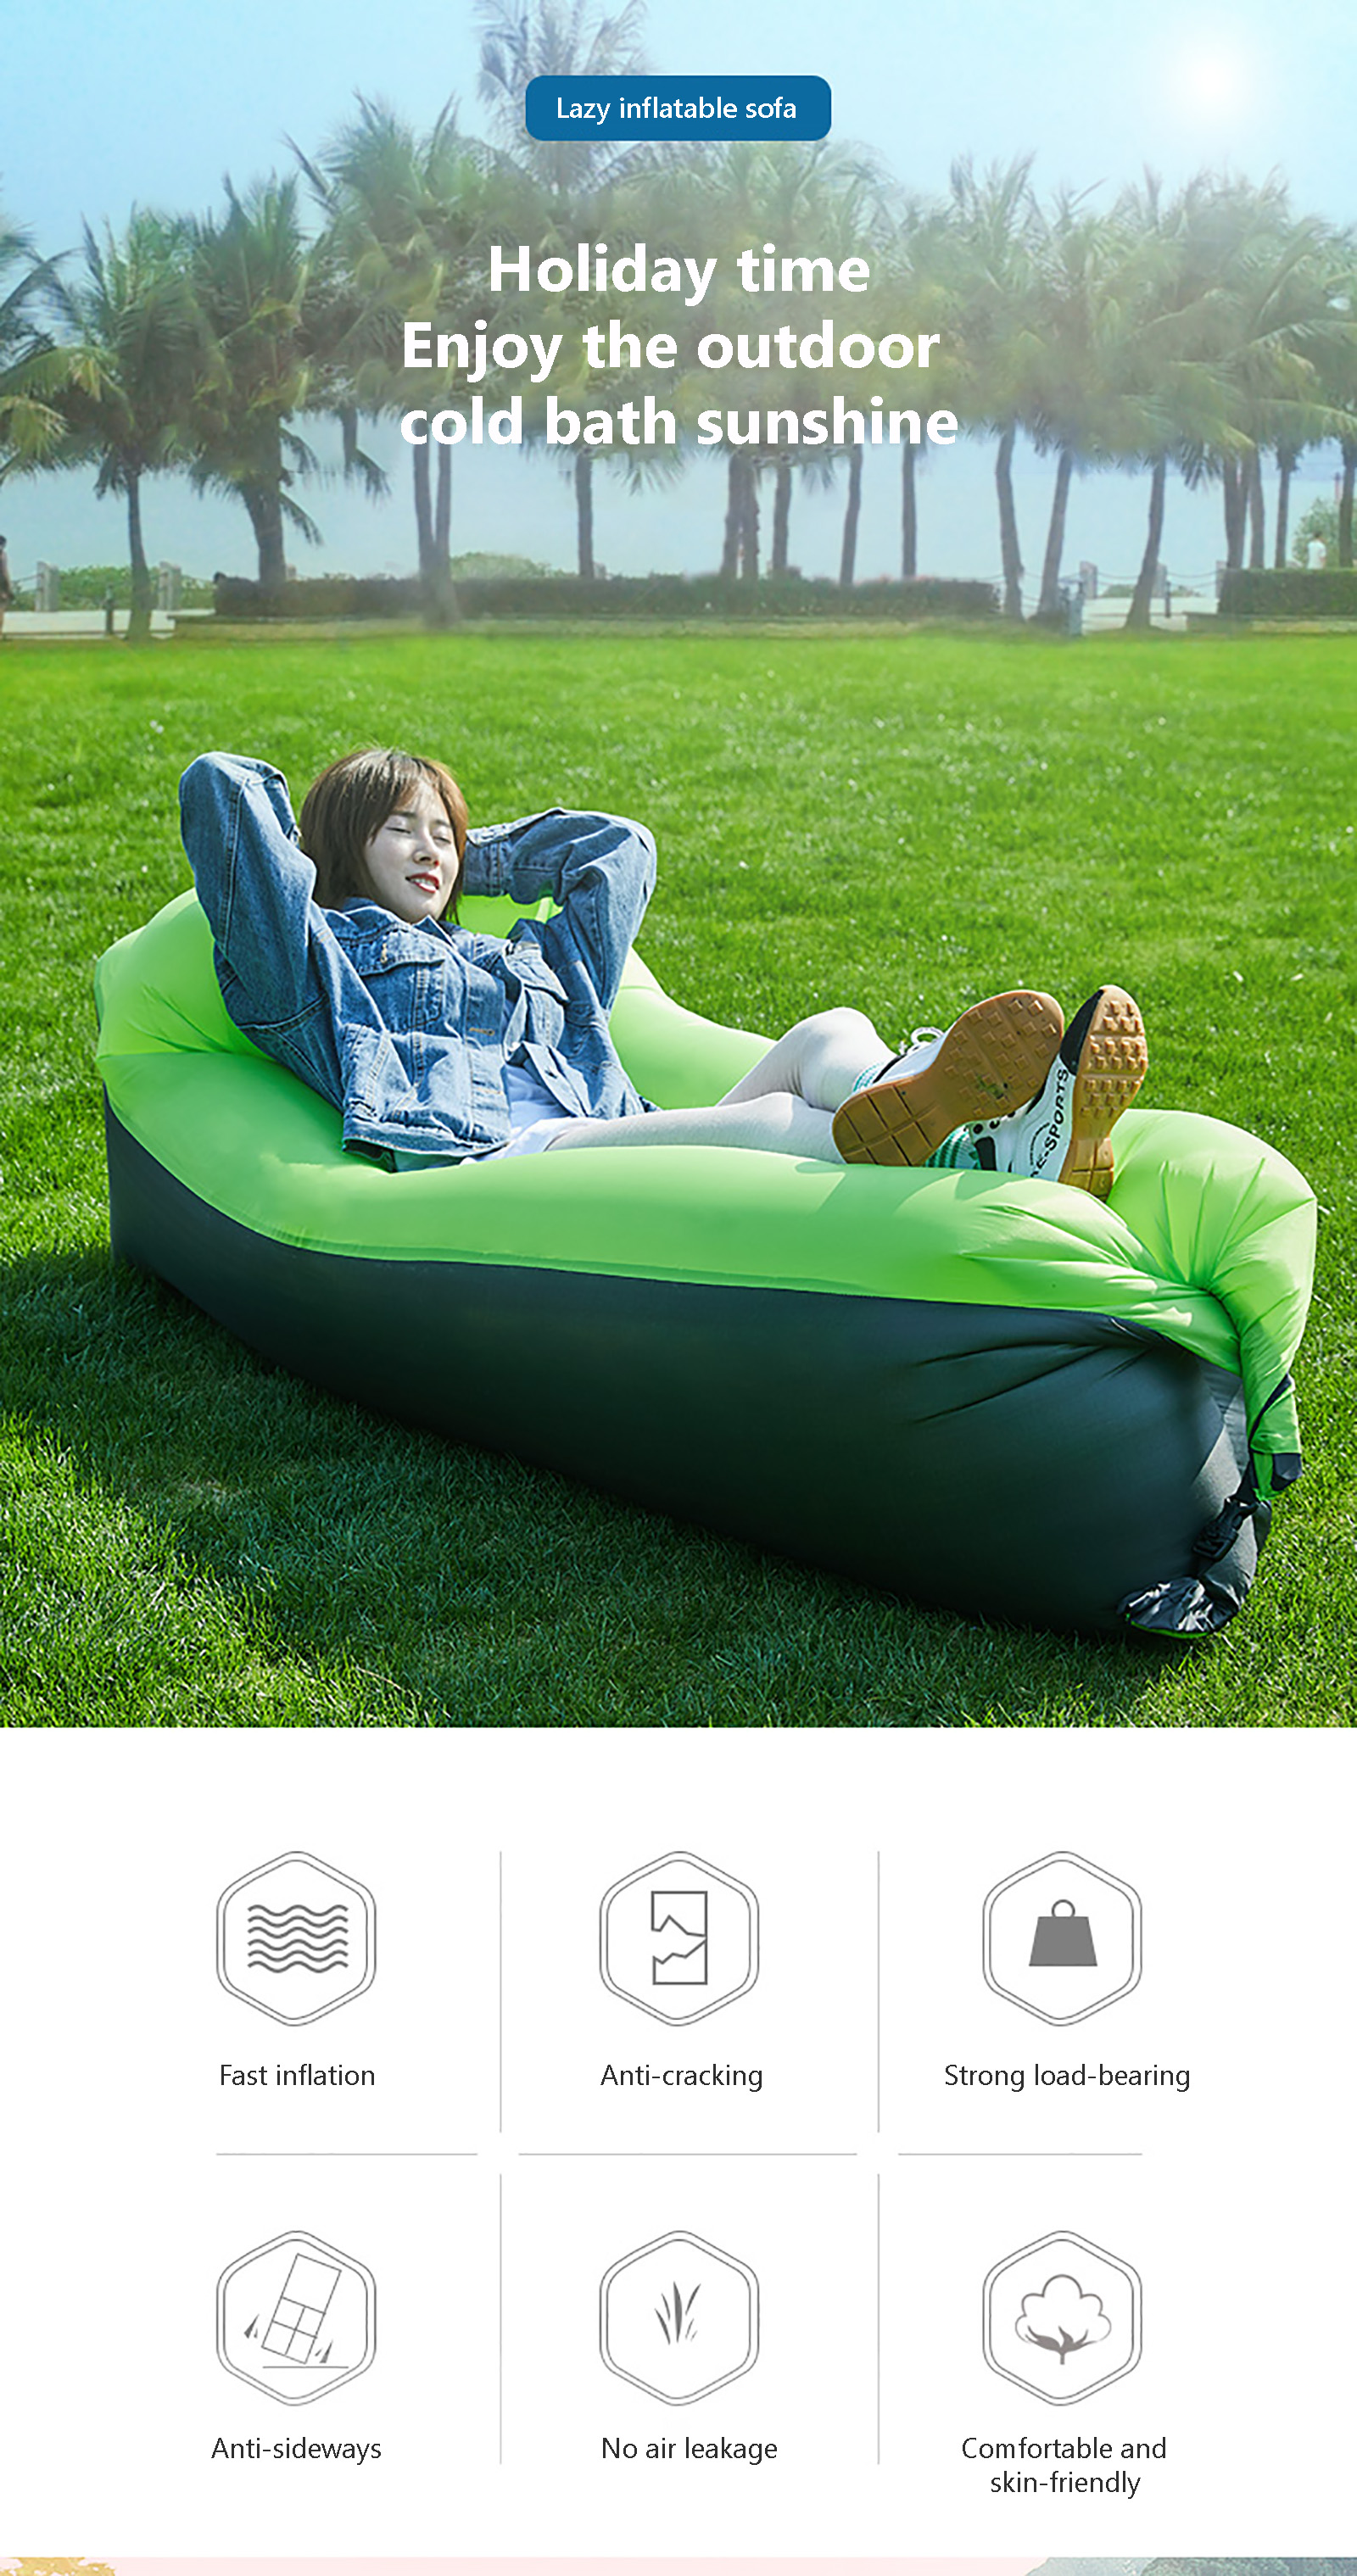 AutomatIc Inflatable Sleeping Bed 2 Person Air Mattress Thickened Portable  Car Outdoor Lazy Cushion Self Driving Camping - buy AutomatIc Inflatable  Sleeping Bed 2 Person Air Mattress Thickened Portable Car Outdoor Lazy